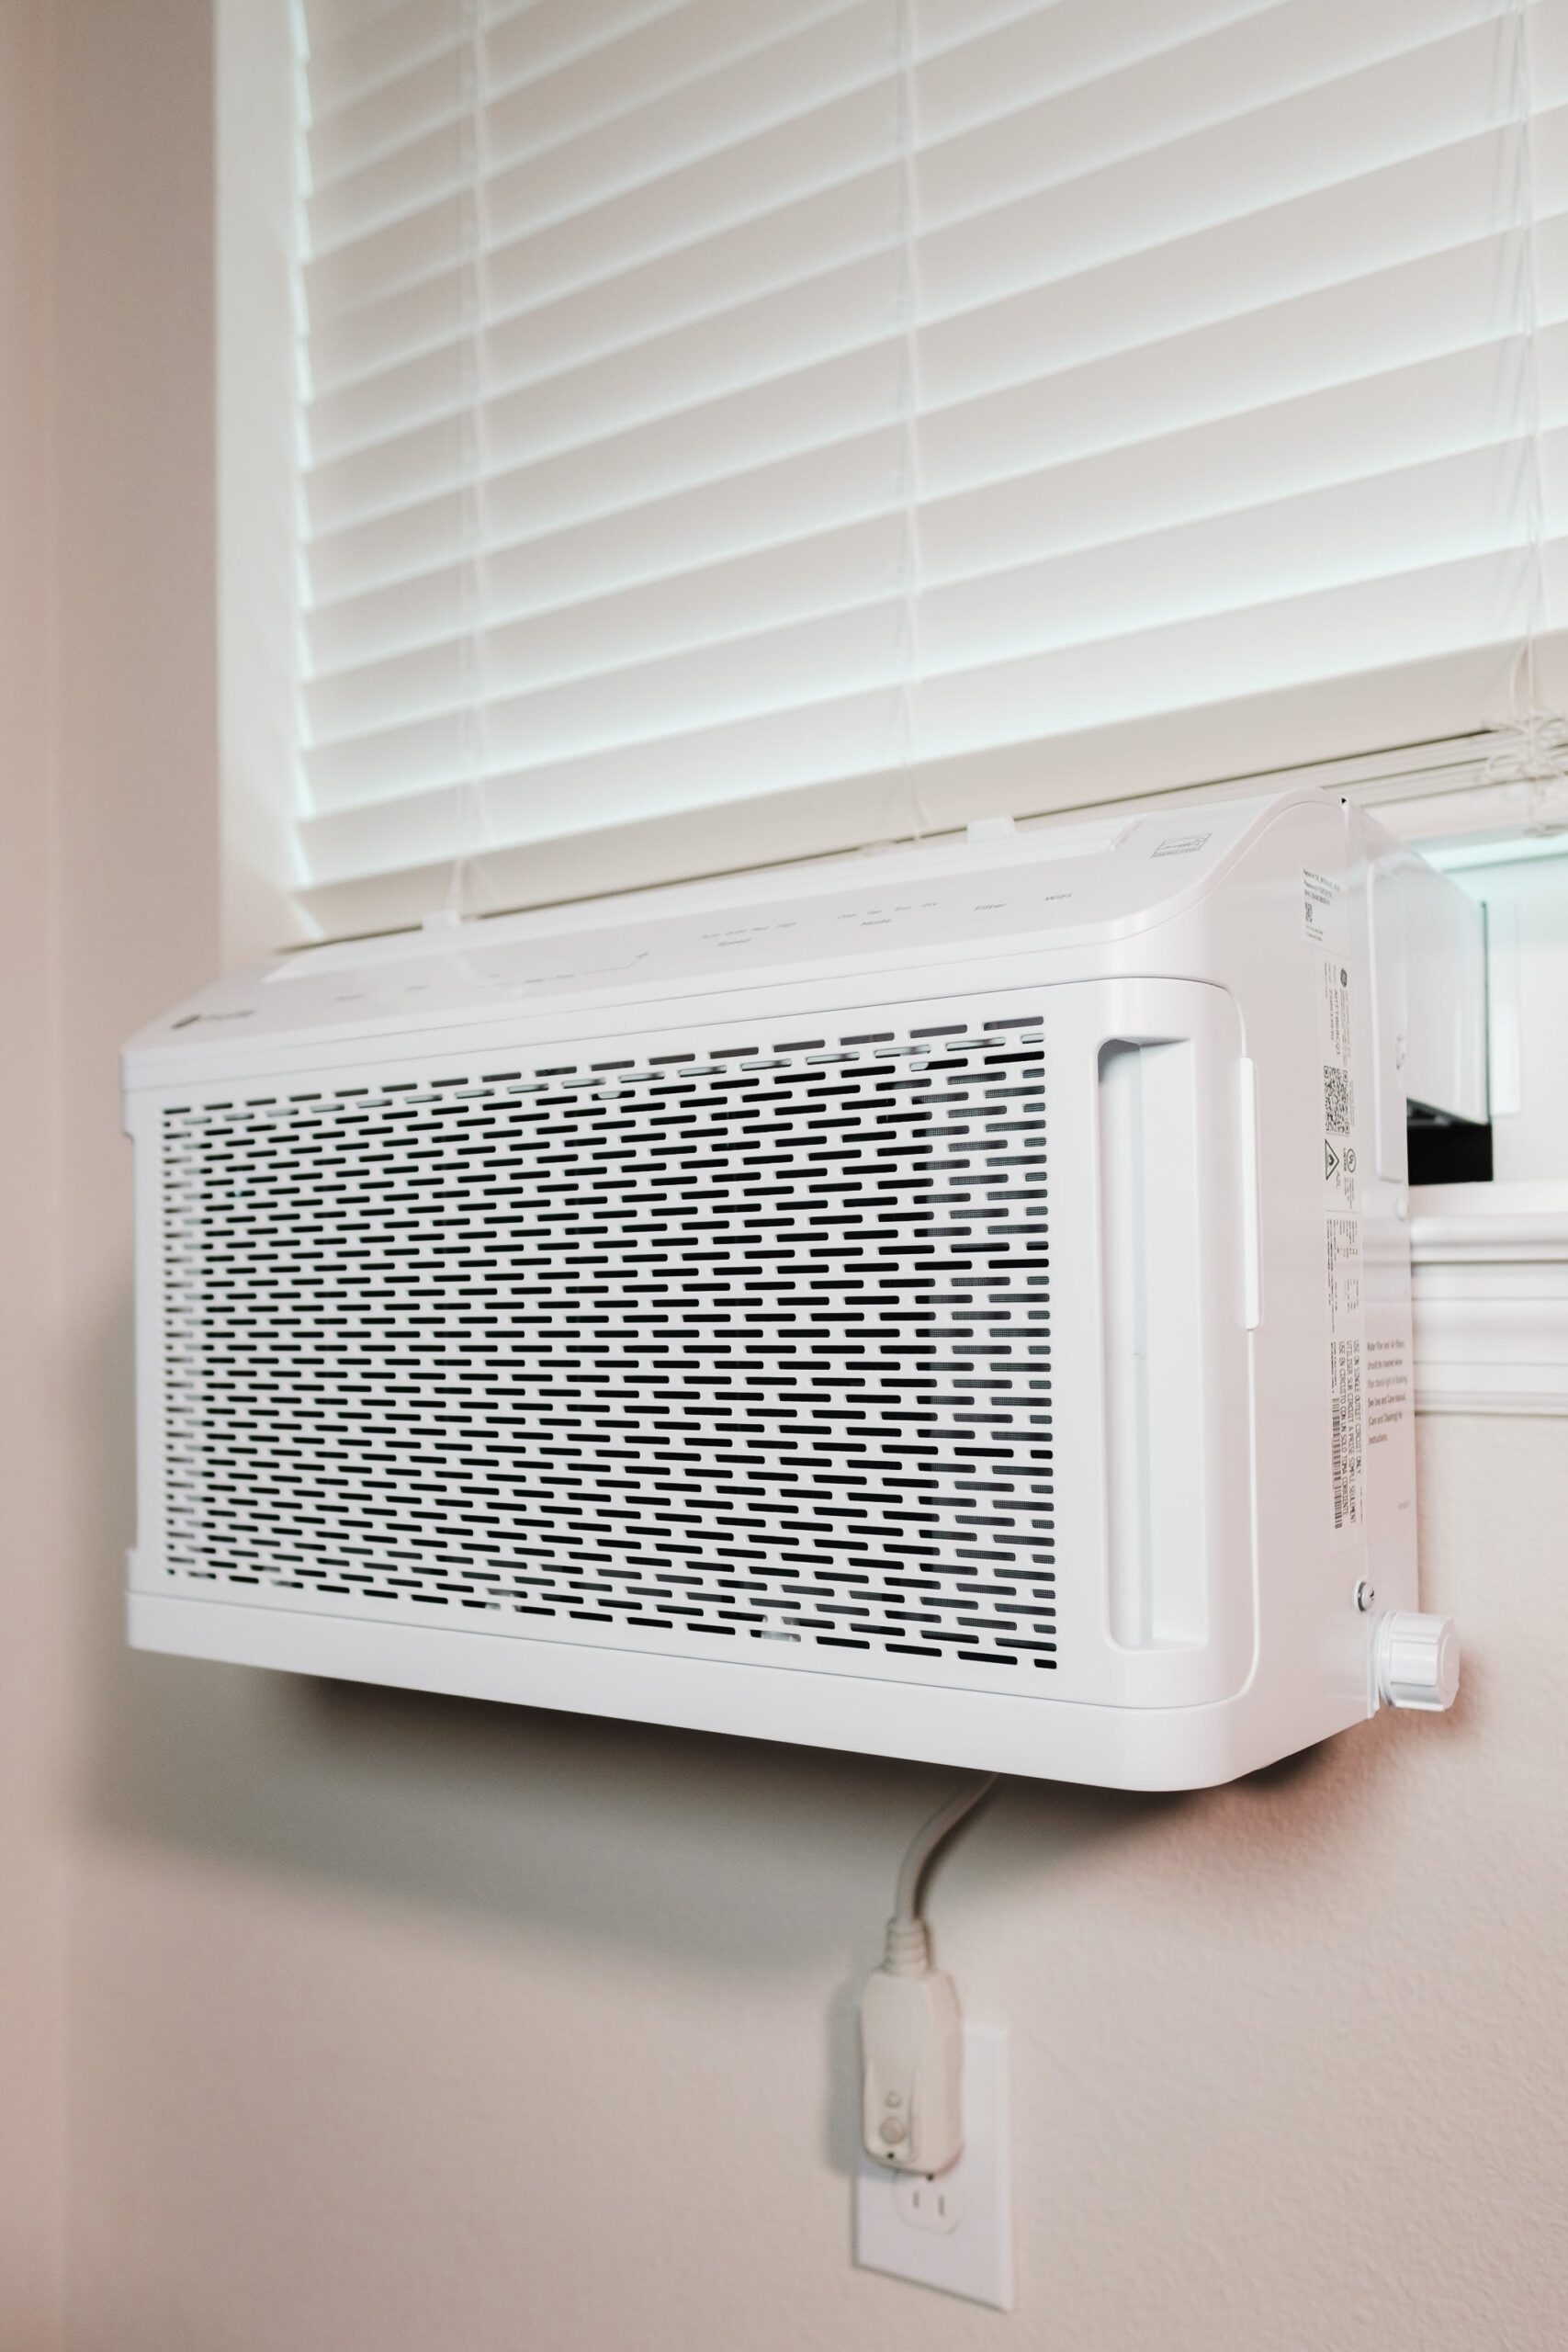 window ac in the room